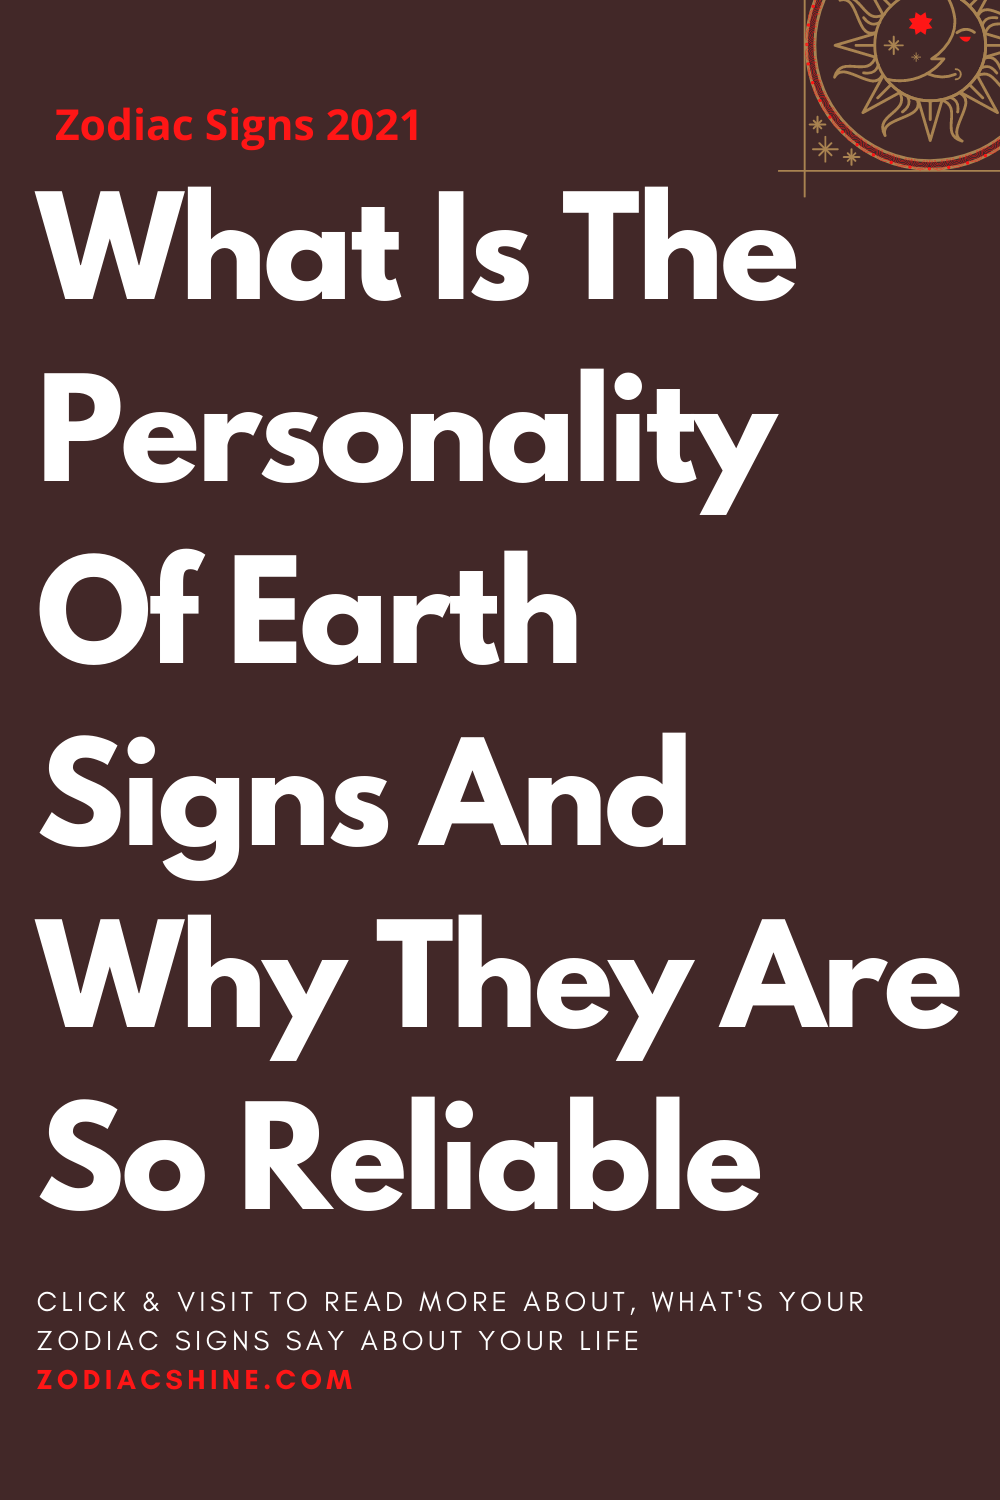 What Is The Personality Of Earth Signs And Why They Are So Reliable